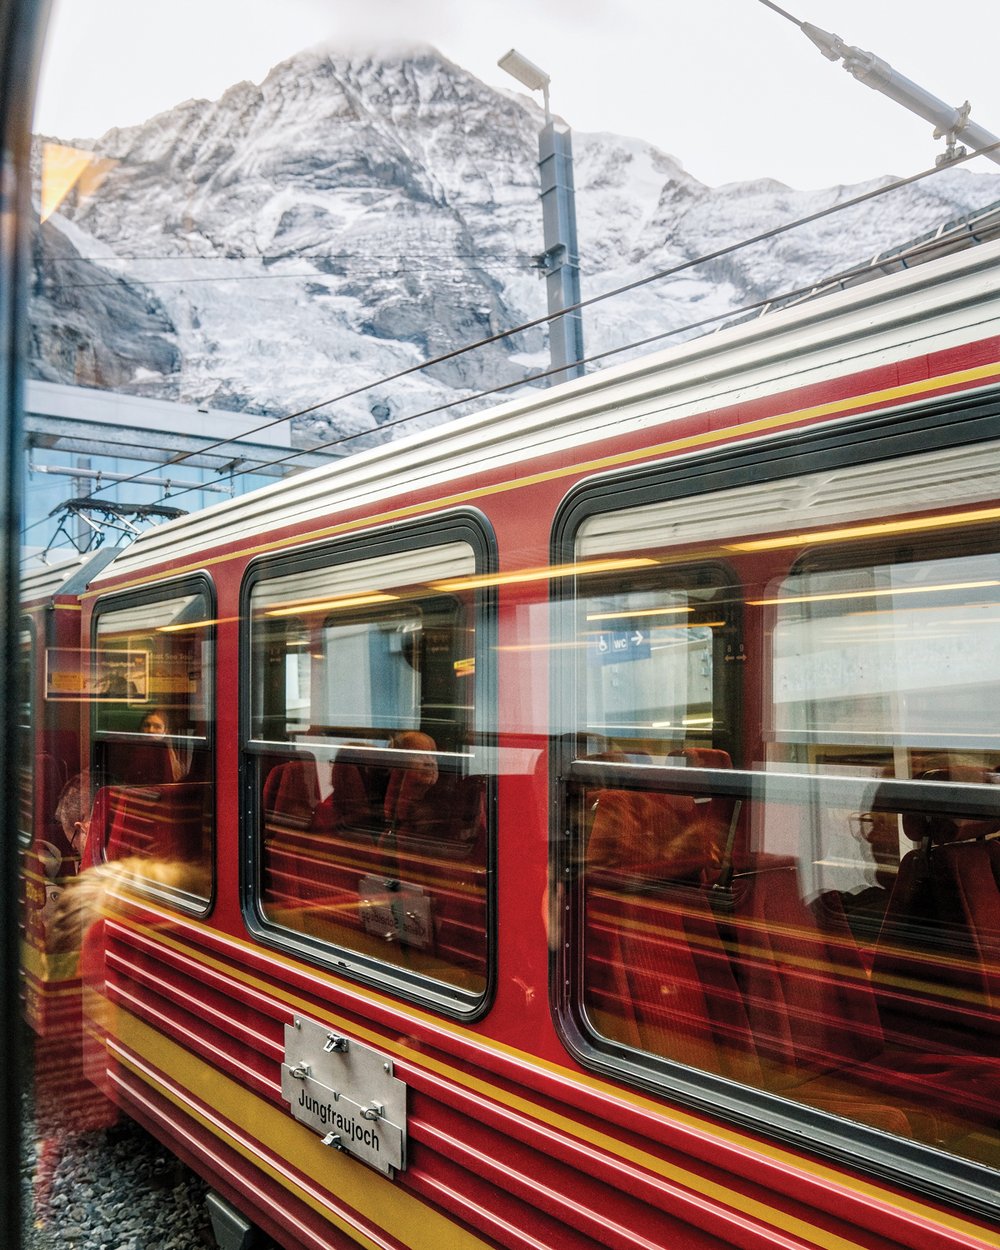 A red train emerges from a tunnel underneath the snowcapped Jungfrau Mountains.